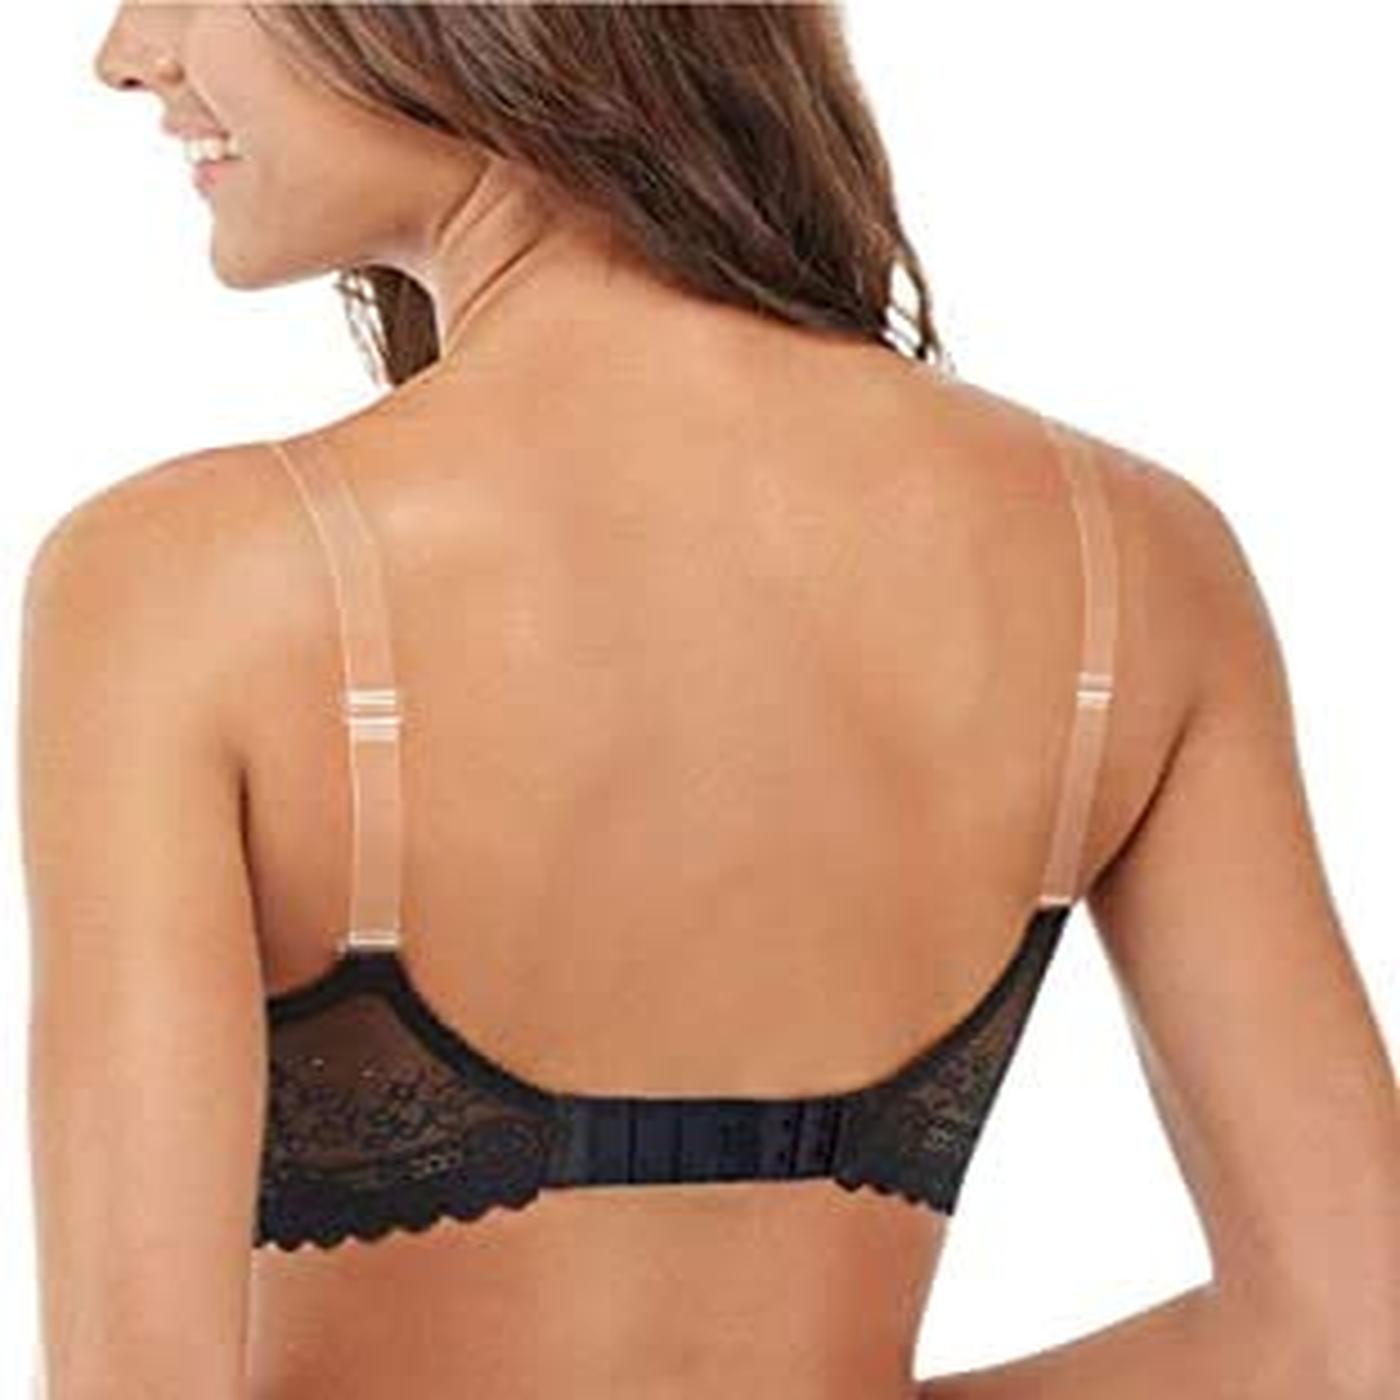 Women's Transparent Frosted Invisible Underwear Straps/ Adjustable